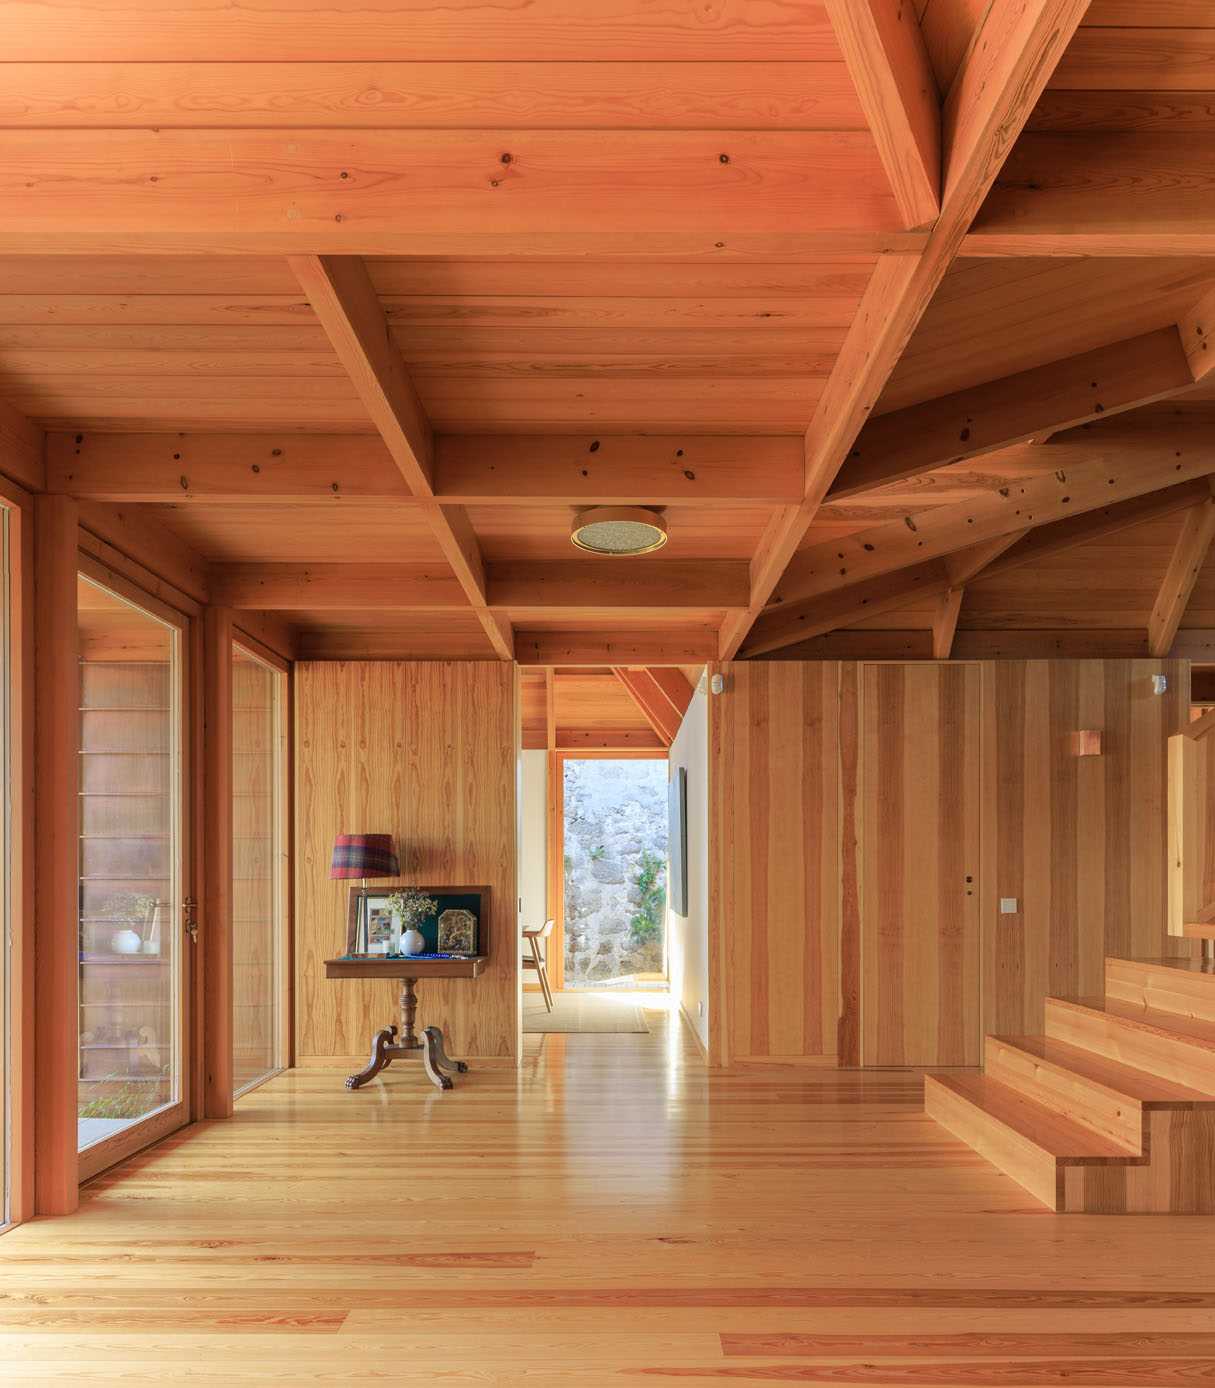 A modern entryway lined with wood.